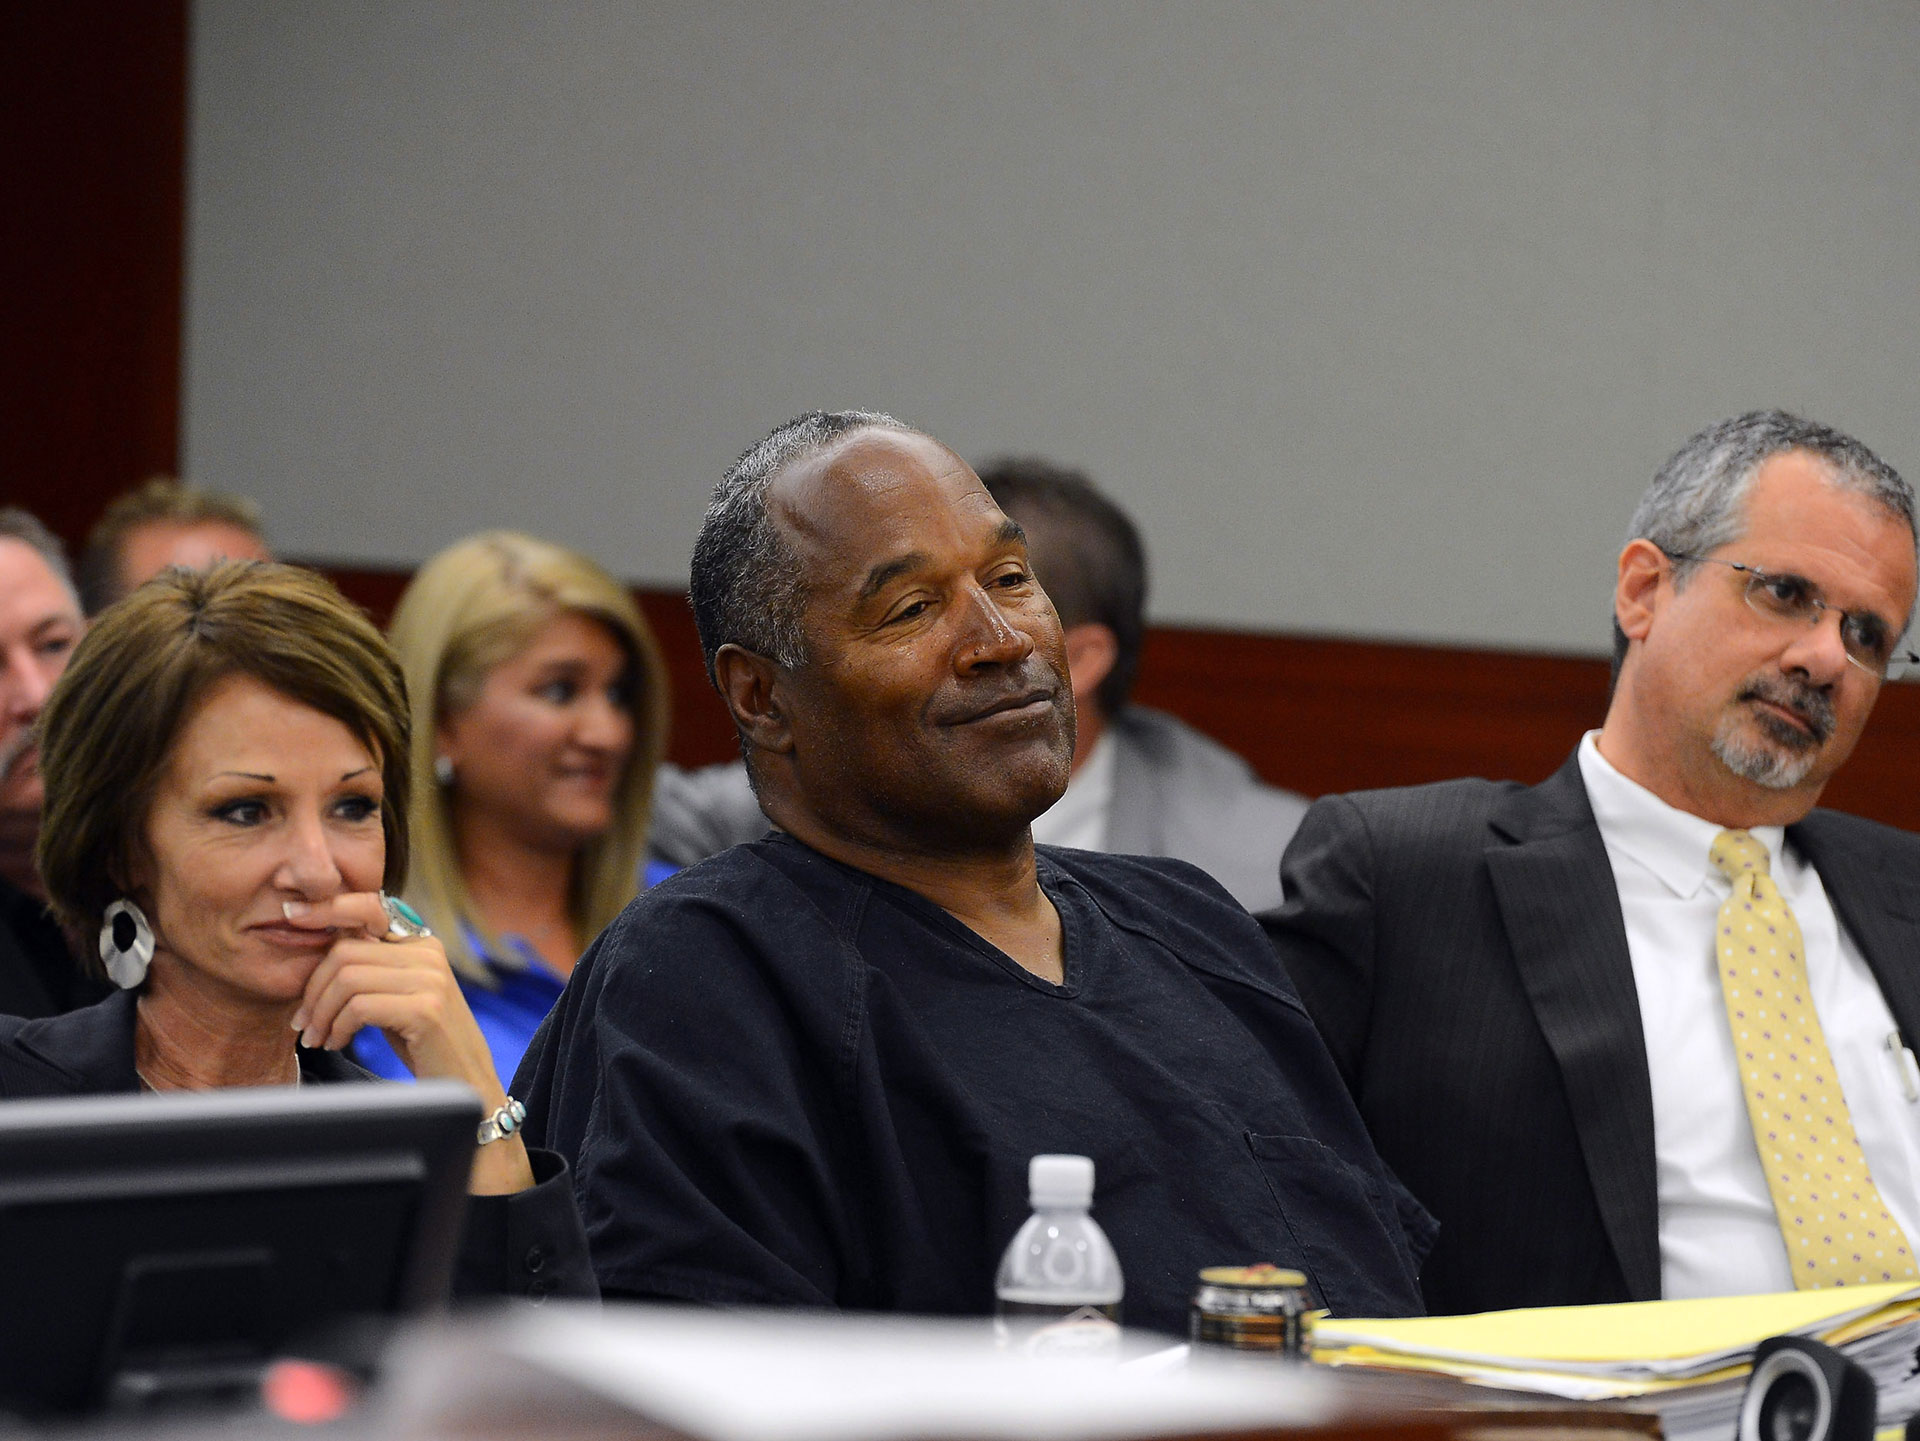 OJ Simpson, 70, will walk free from jail in October